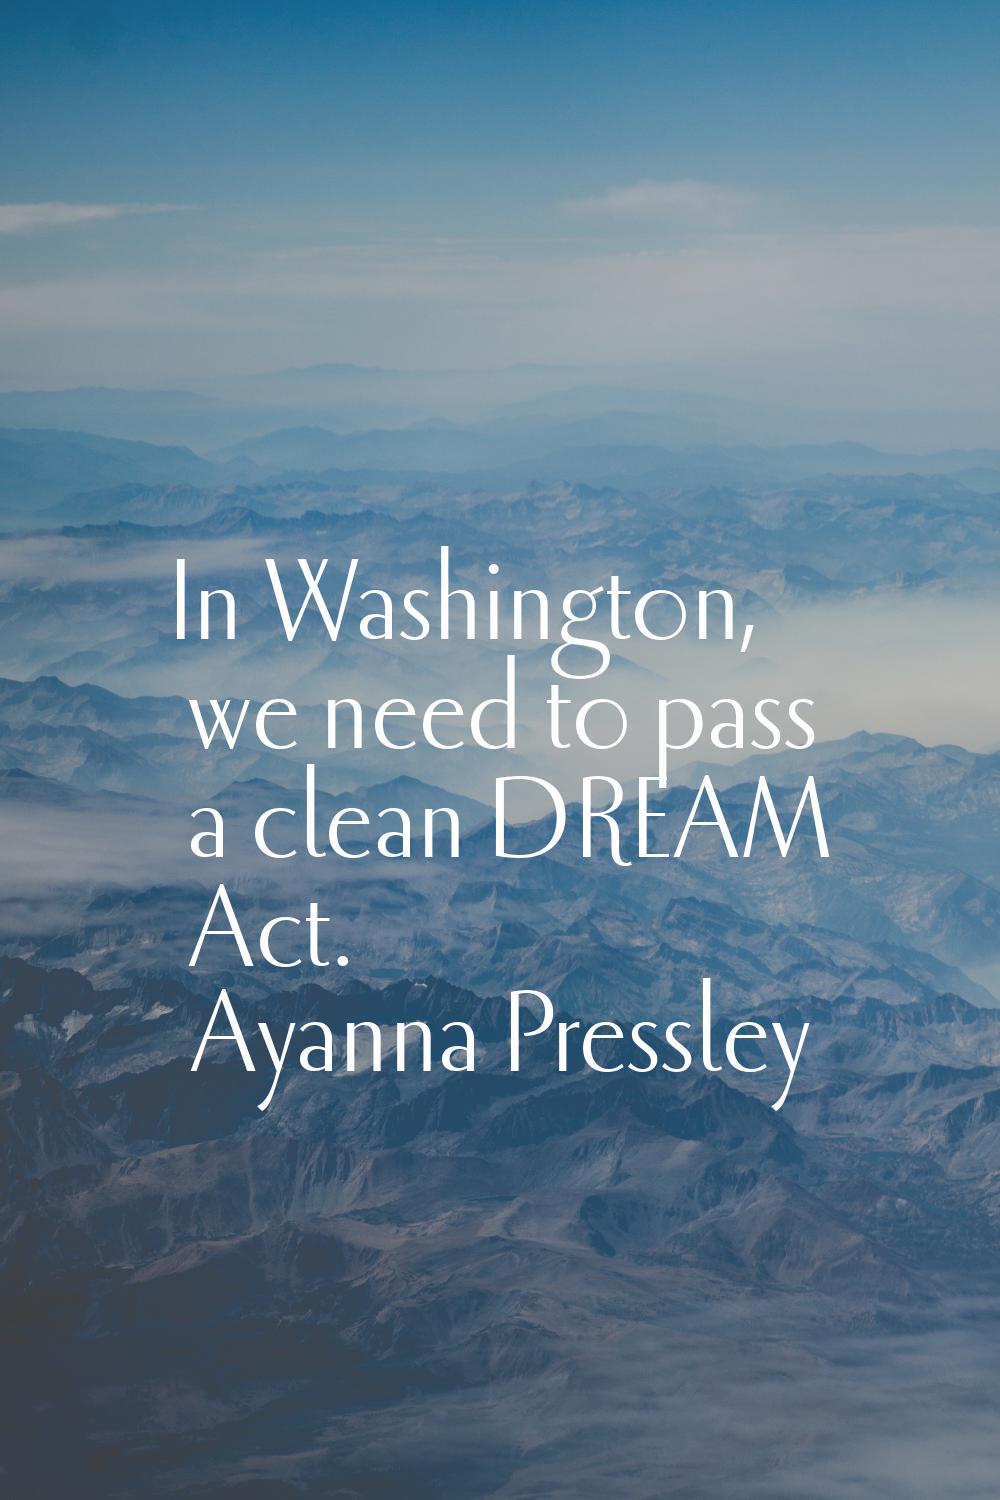 In Washington, we need to pass a clean DREAM Act.